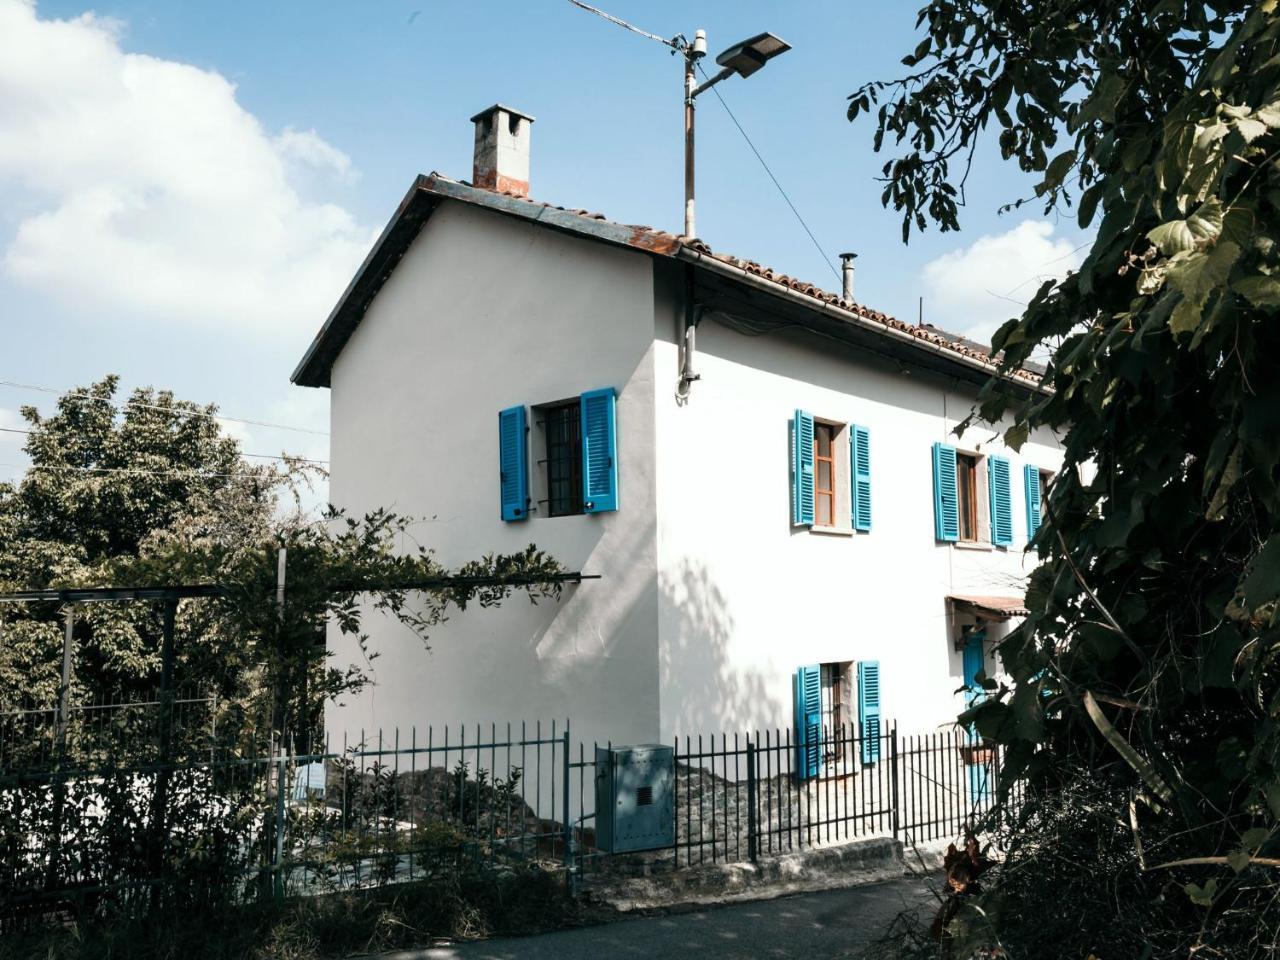 Superb Holiday Home In Piedmont Italy With Fireplace Santo Stefano Belbo Ngoại thất bức ảnh